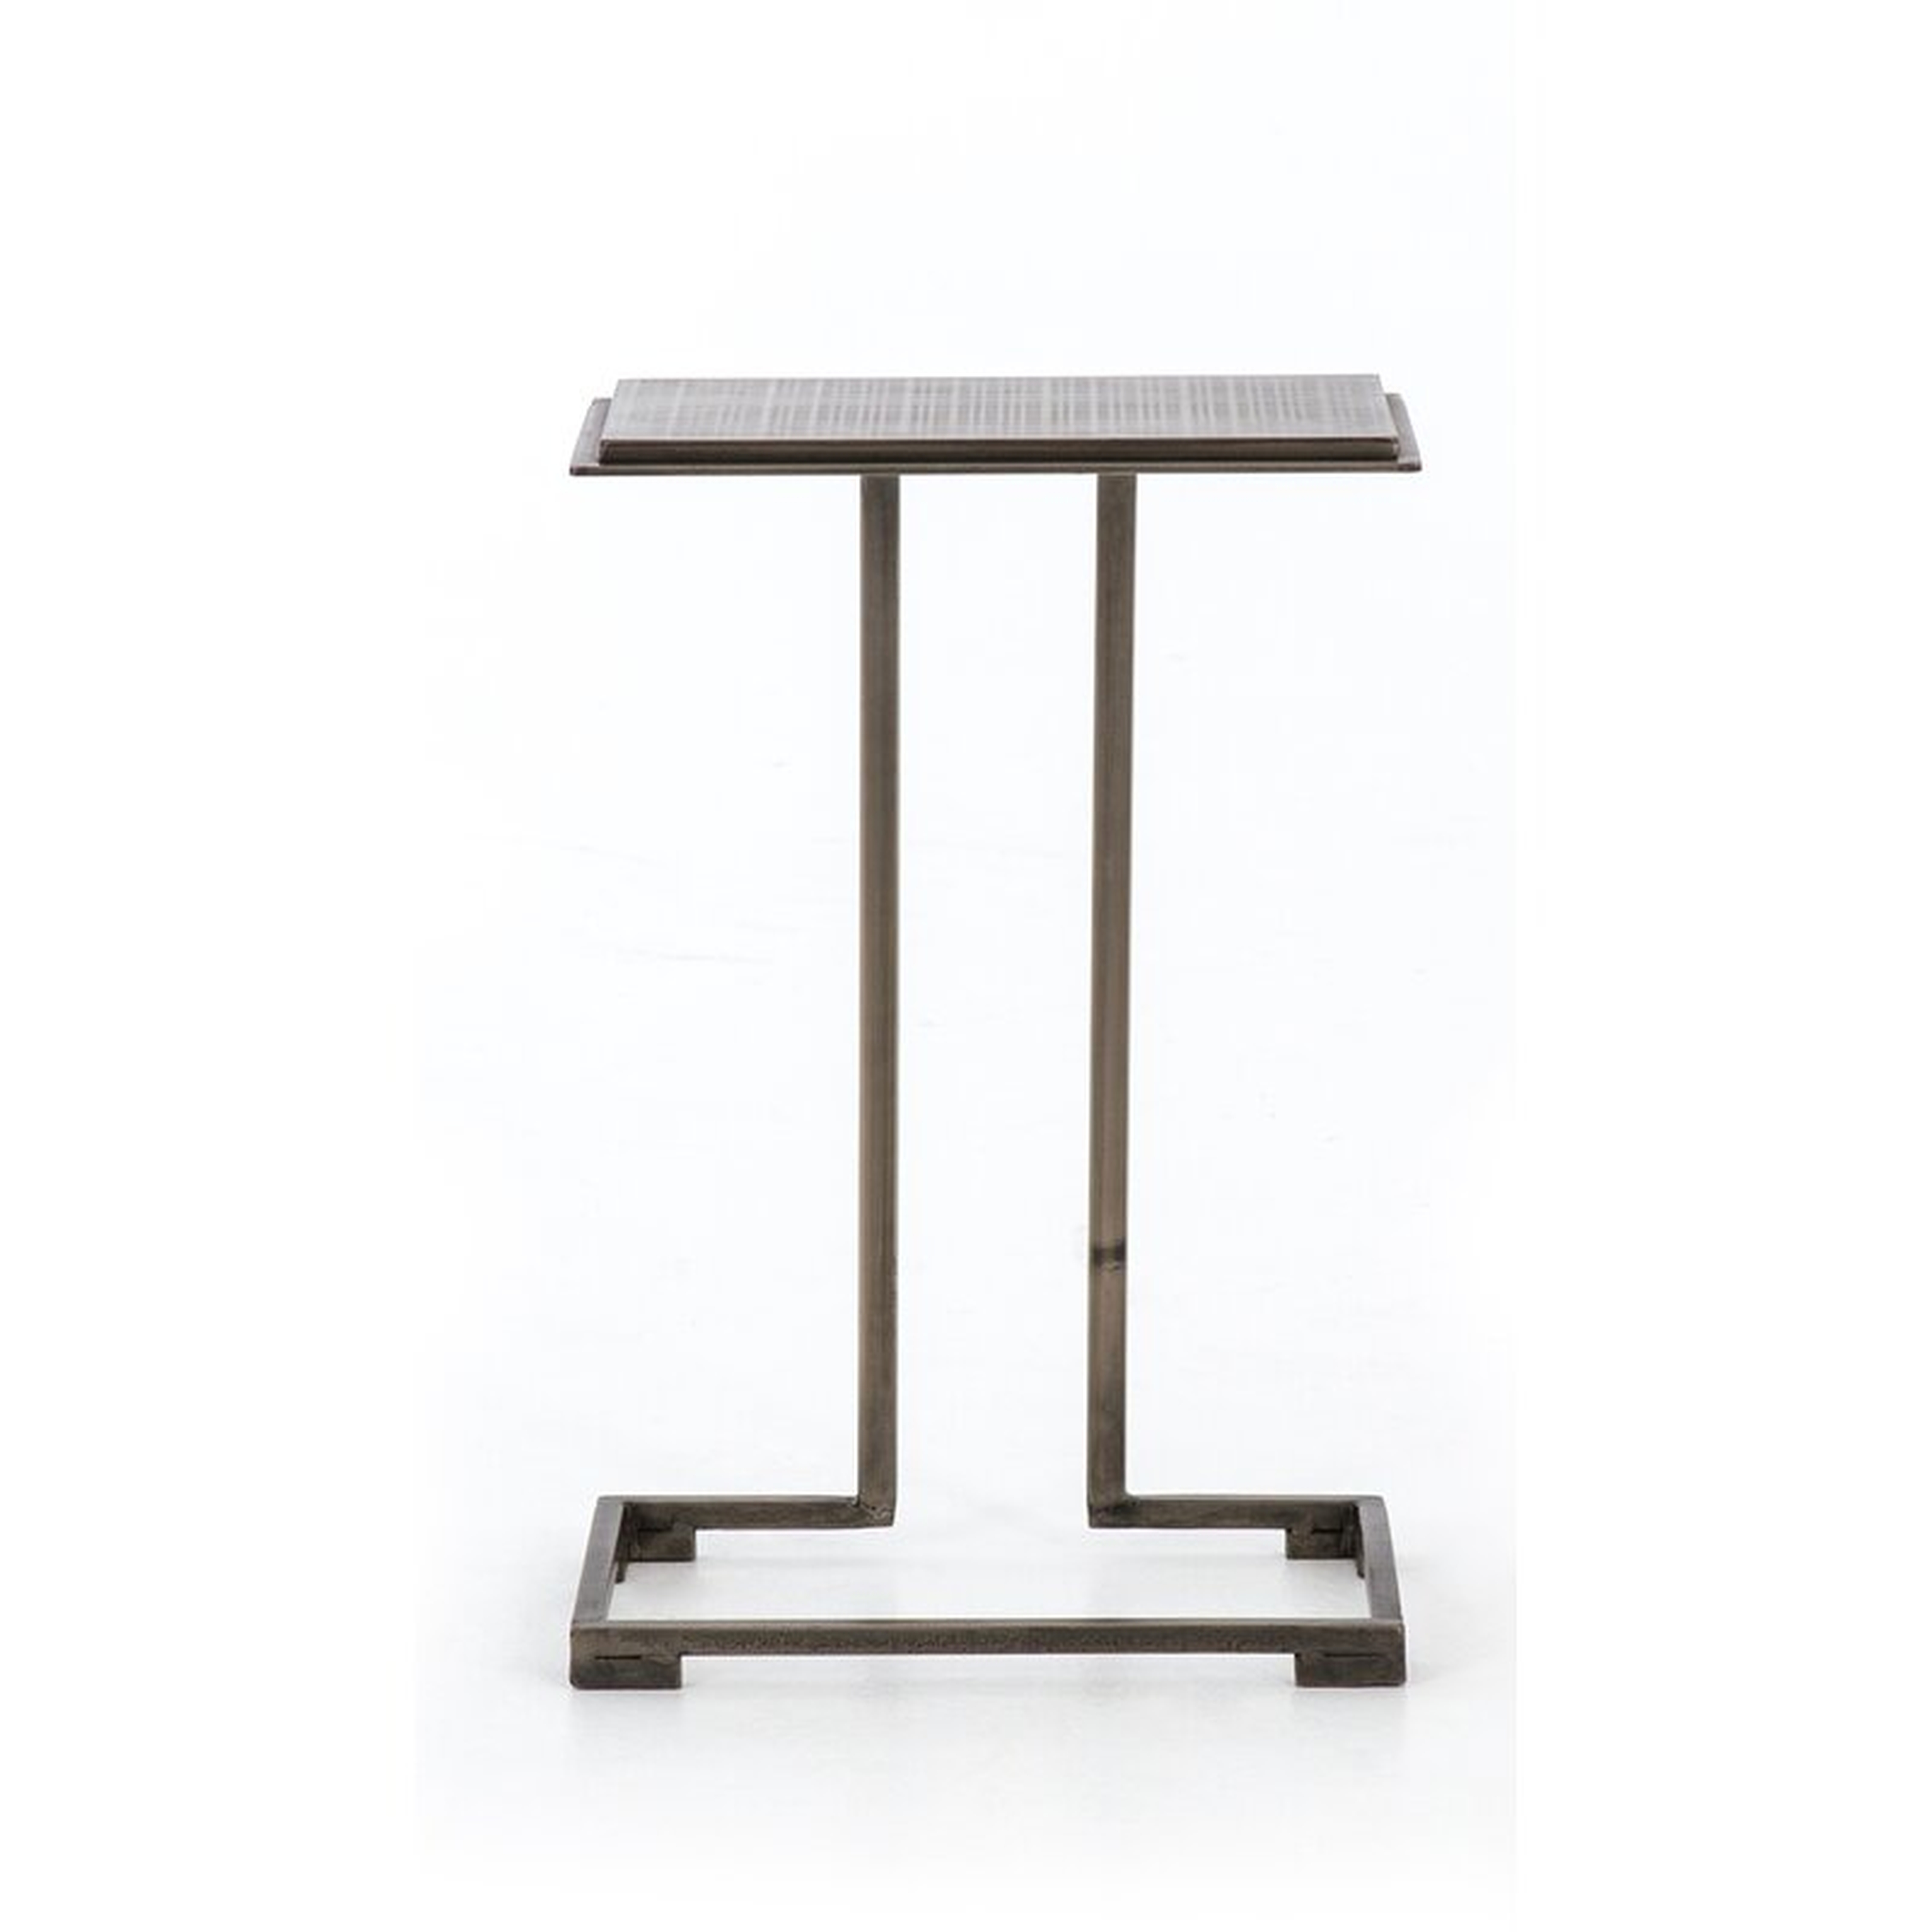 Four Hands C Table Table Base Color: Antique Nickel - Perigold